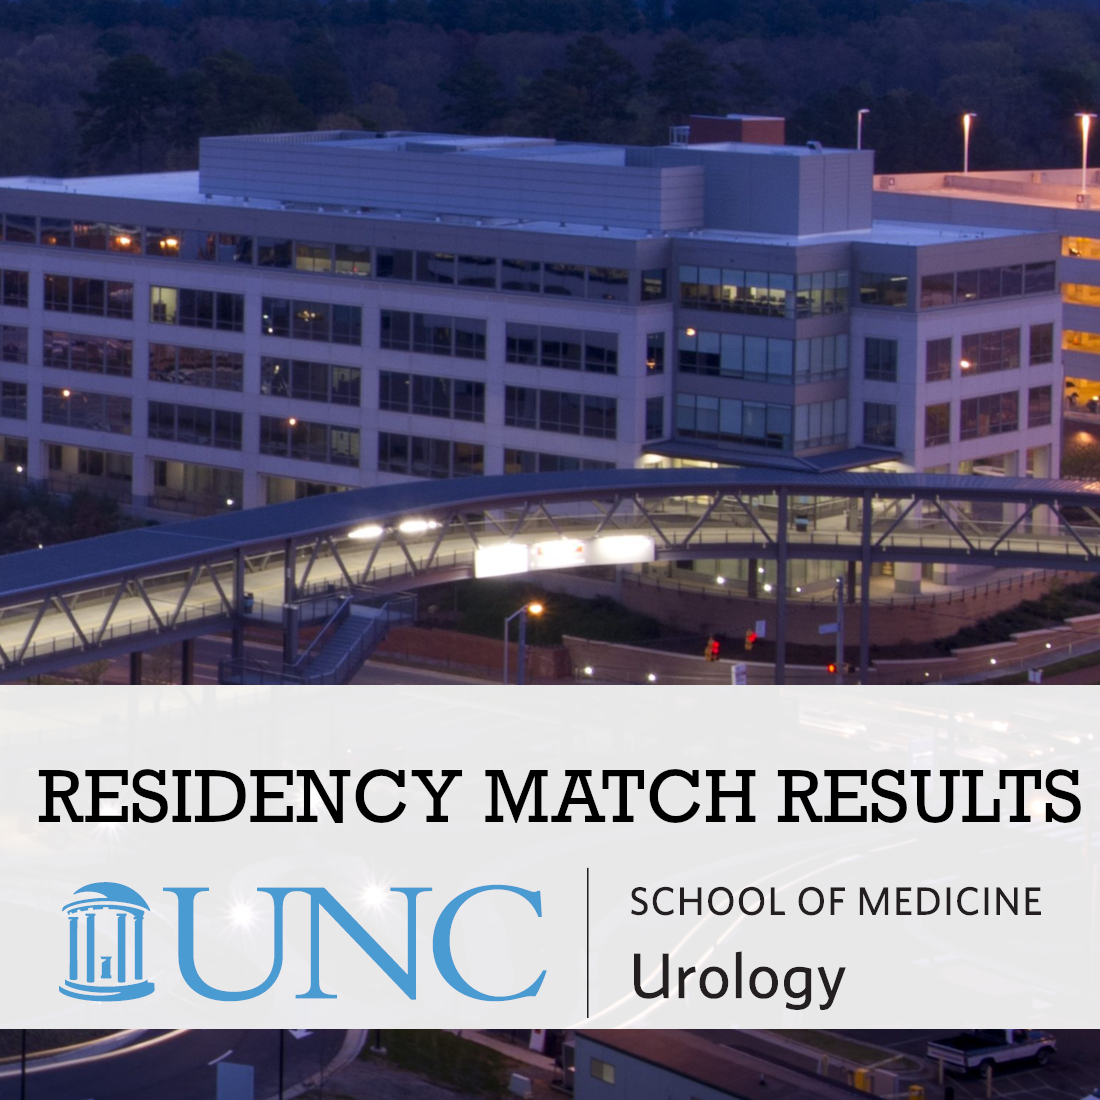 The Department of Urology at the University of North Carolina